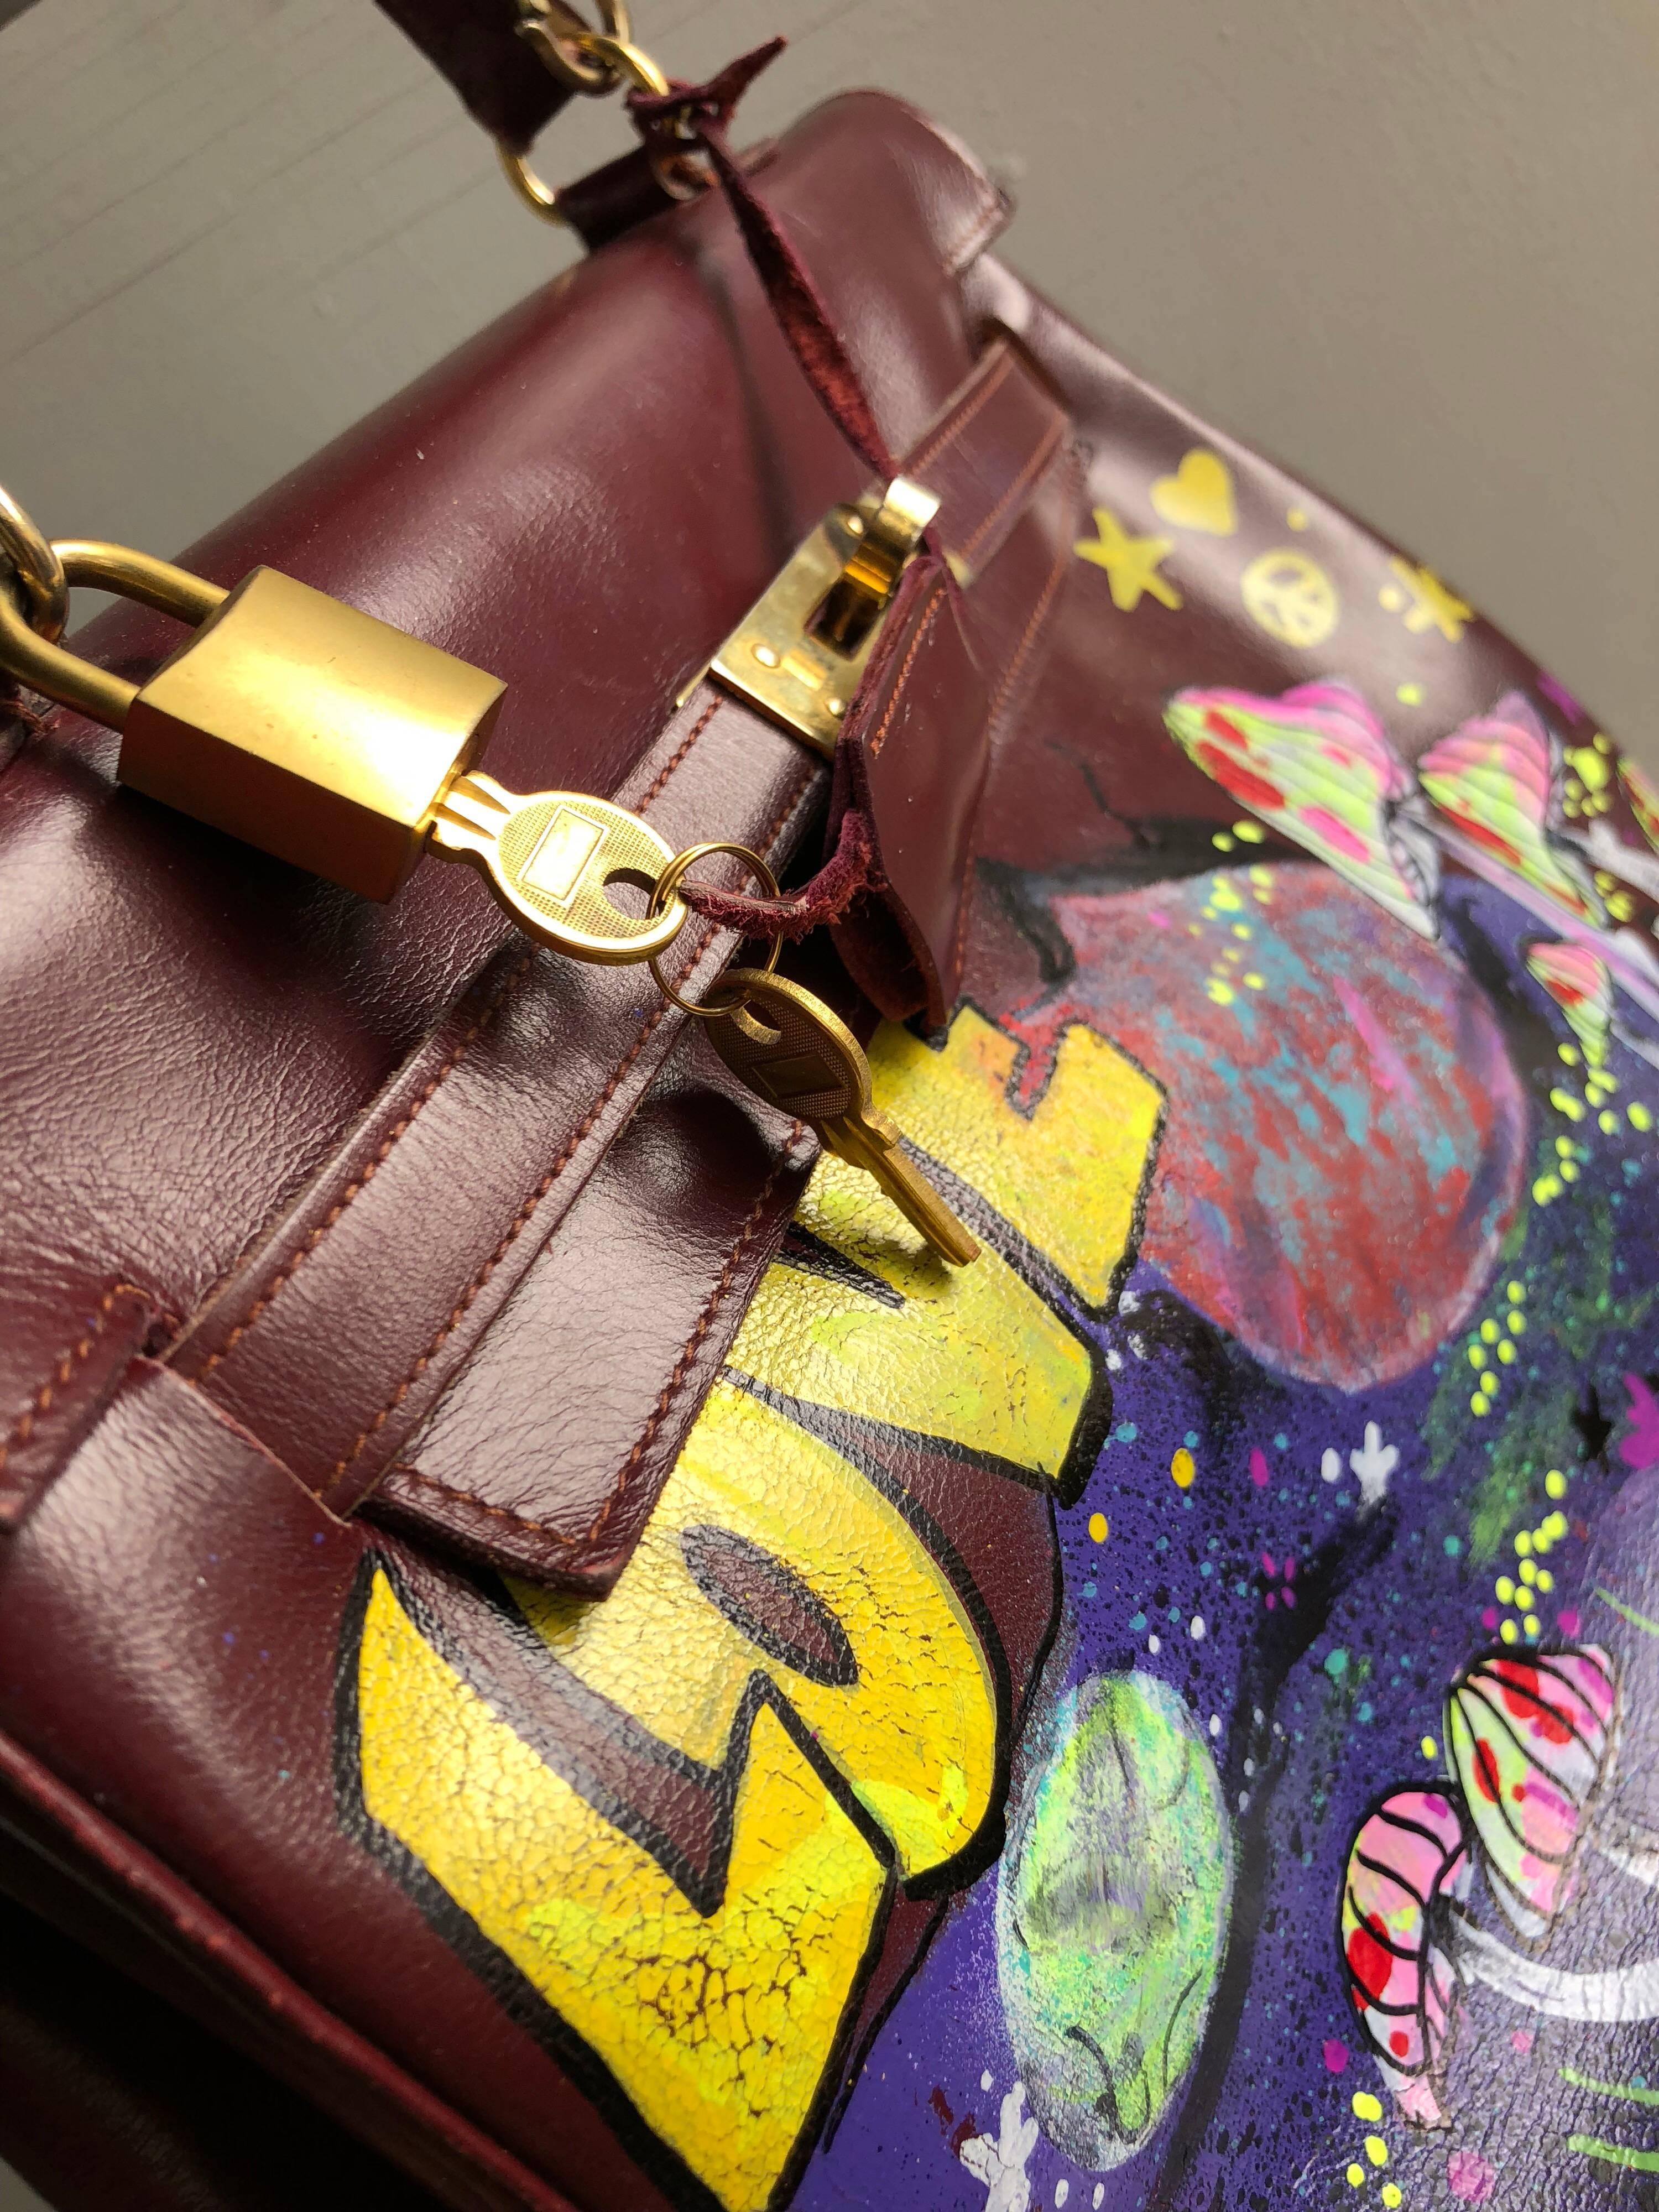 Merlot Leather Bag With Custom LOVE Graffiti Art, 1950s In Excellent Condition For Sale In Gresham, OR